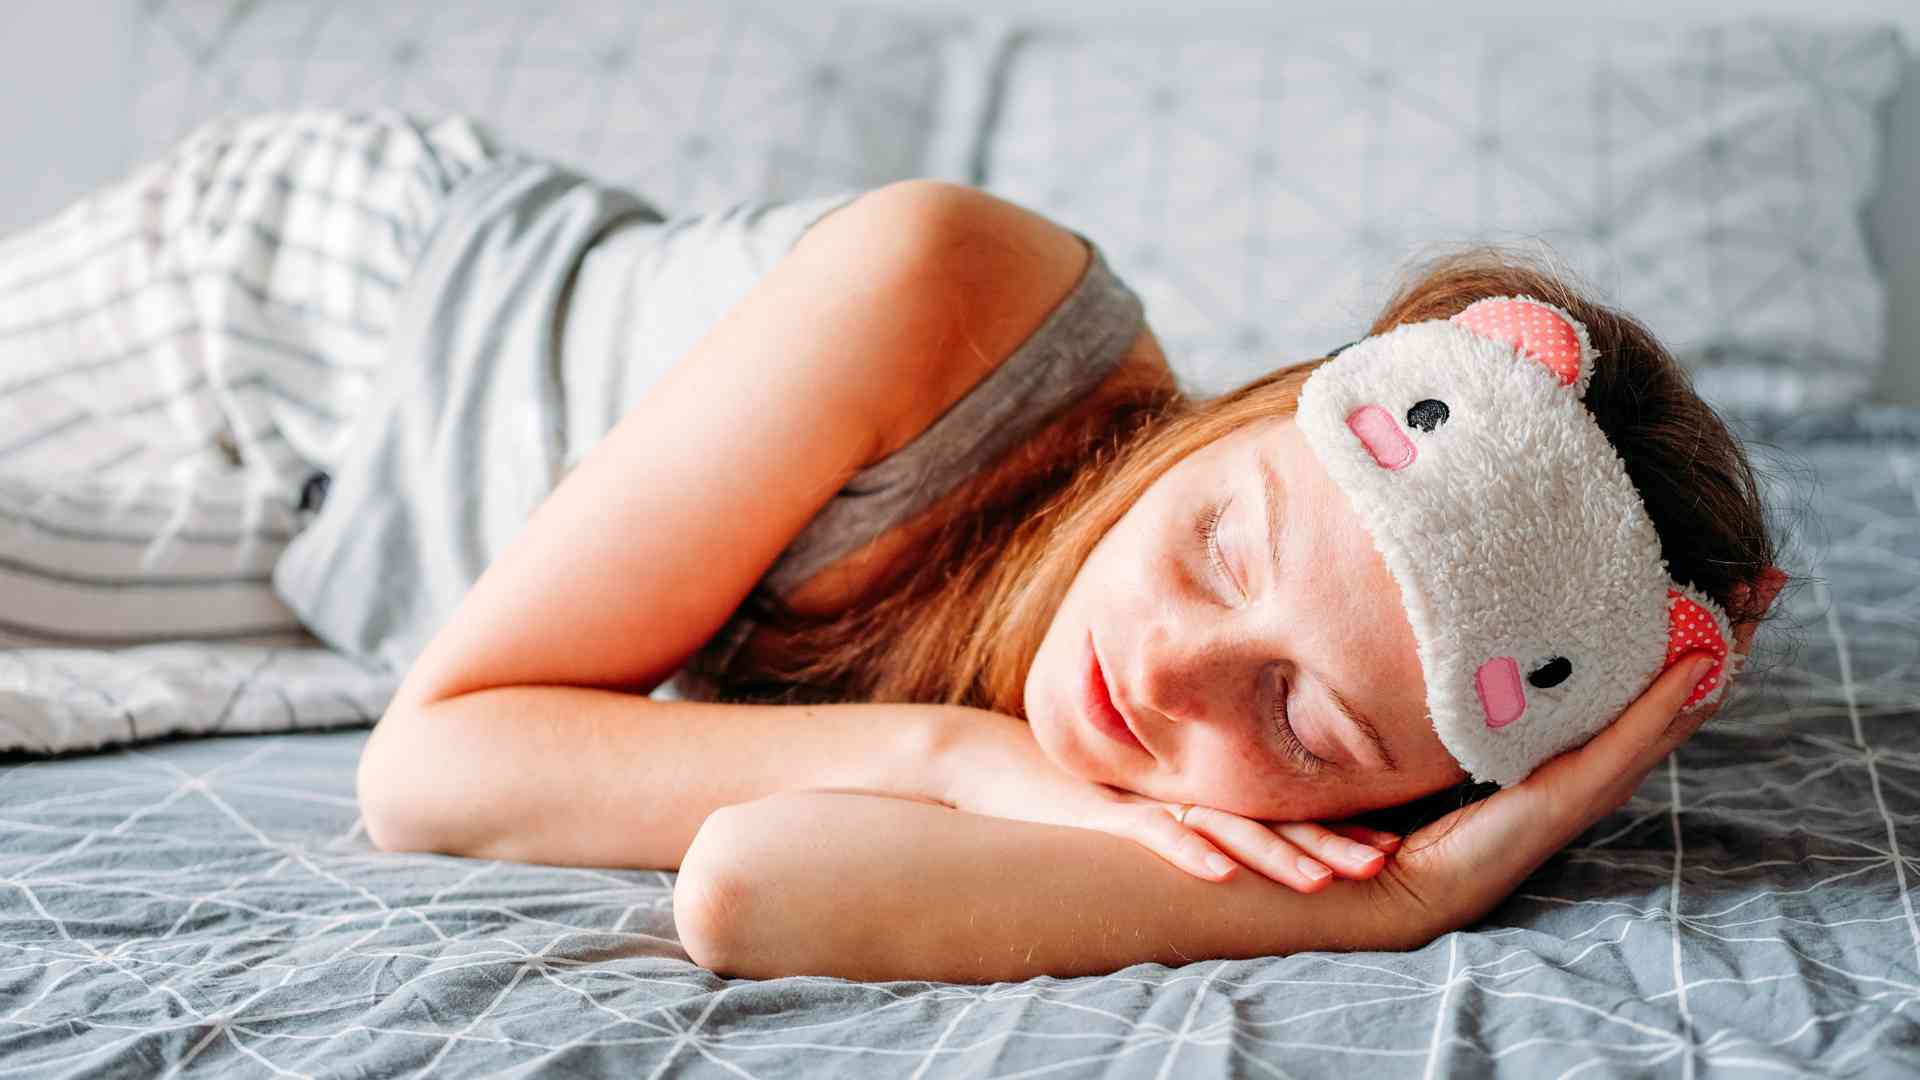 How does one_s sleeping habits affect hair loss, and are there tips for improving sleep quality